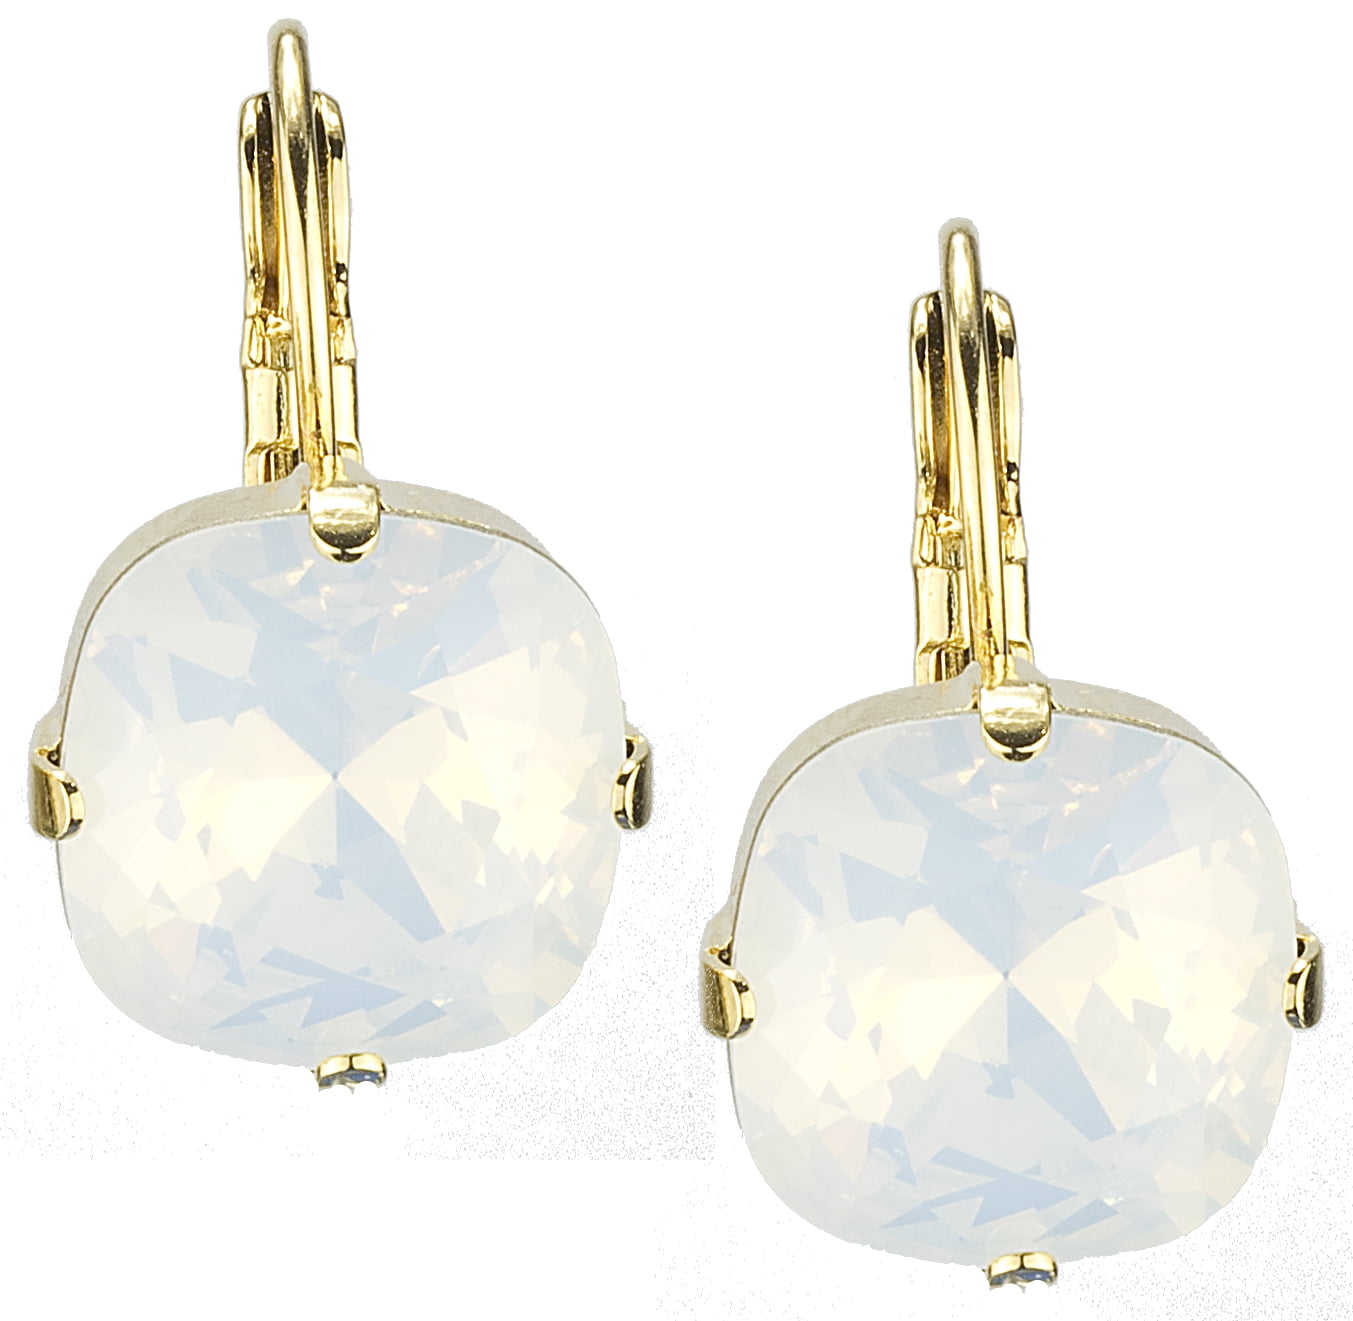 Details about   NEW COLLECTION! 18k Rose Gold Pave Baguette Diamond Gemstone Opal Stud Earrings 